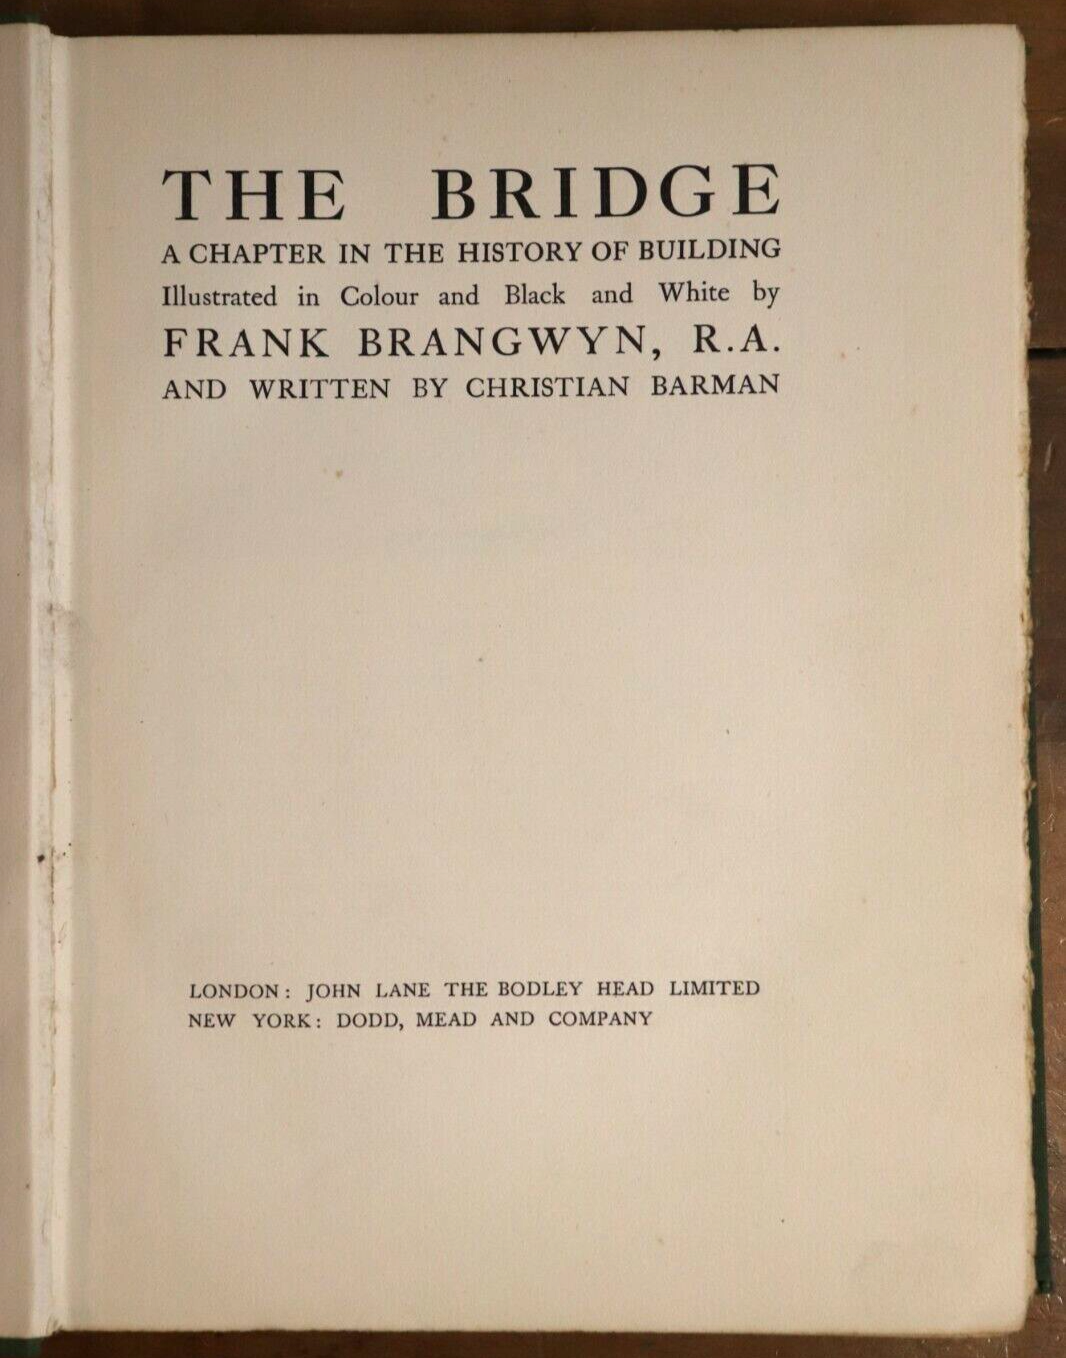 1926 The Bridge by Frank Brangwyn 1st Edition Antique Architecture History Book - 0